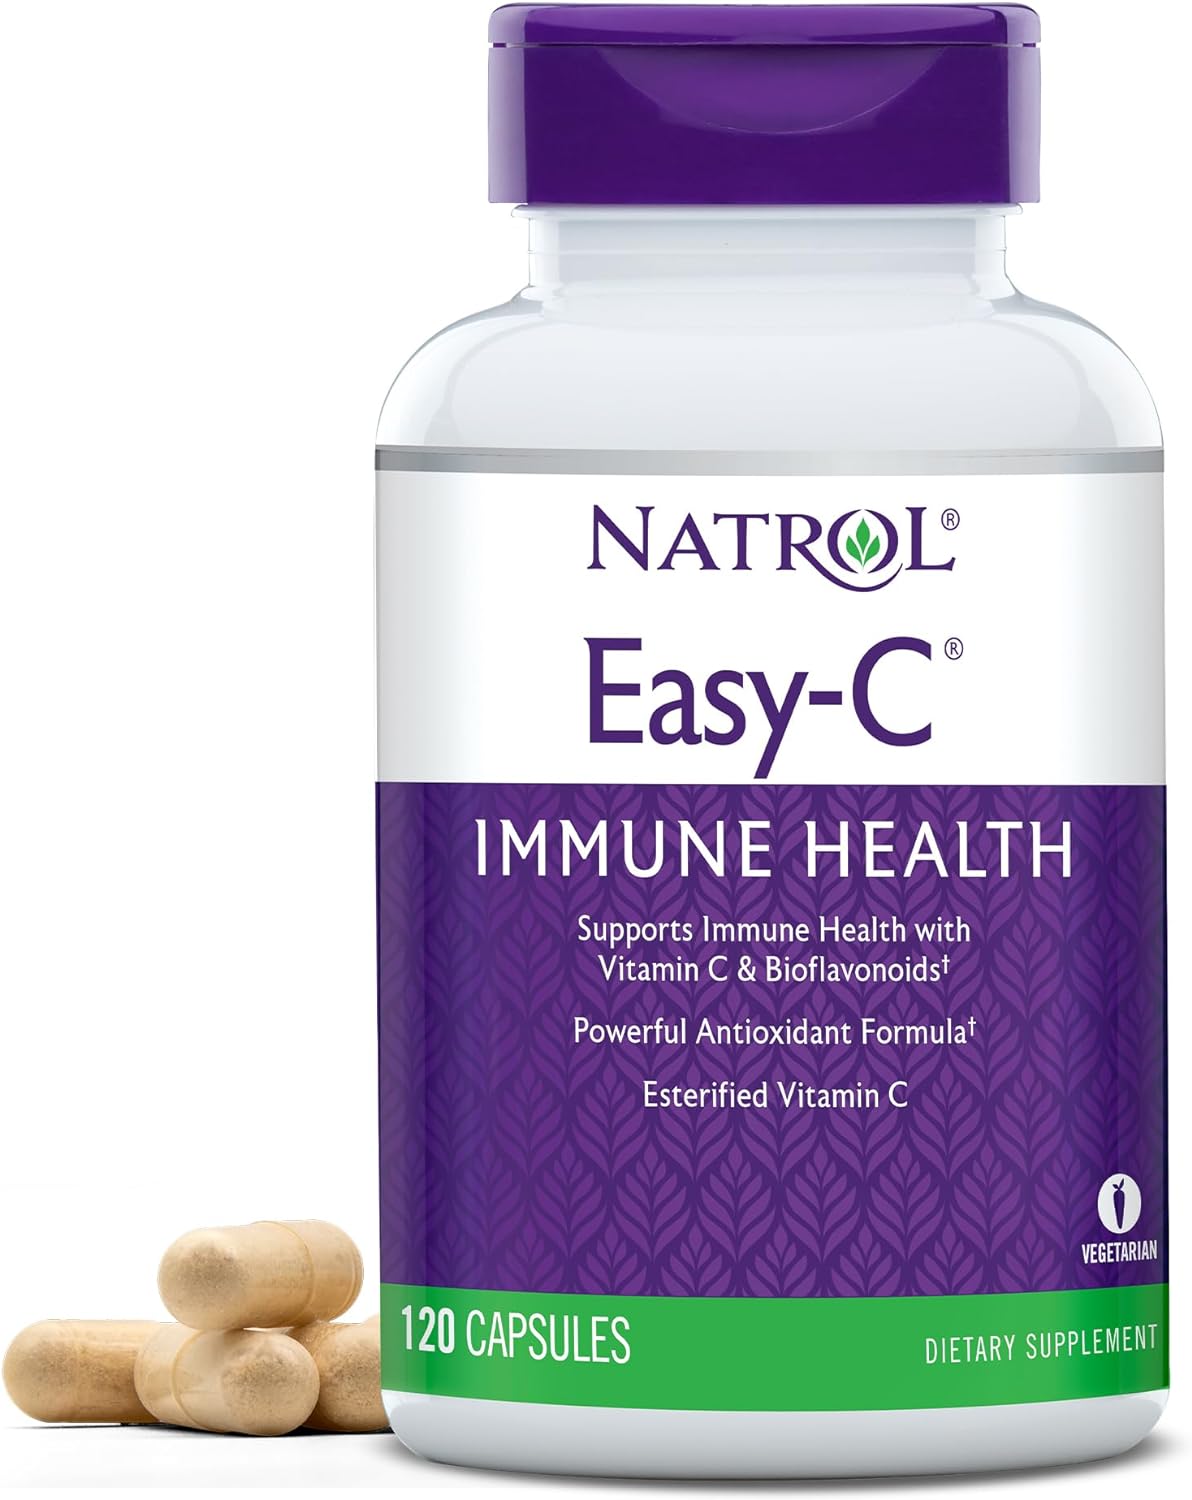 Natrol Easy-C Immune Health, Supports Immune Health with Vitamin C and